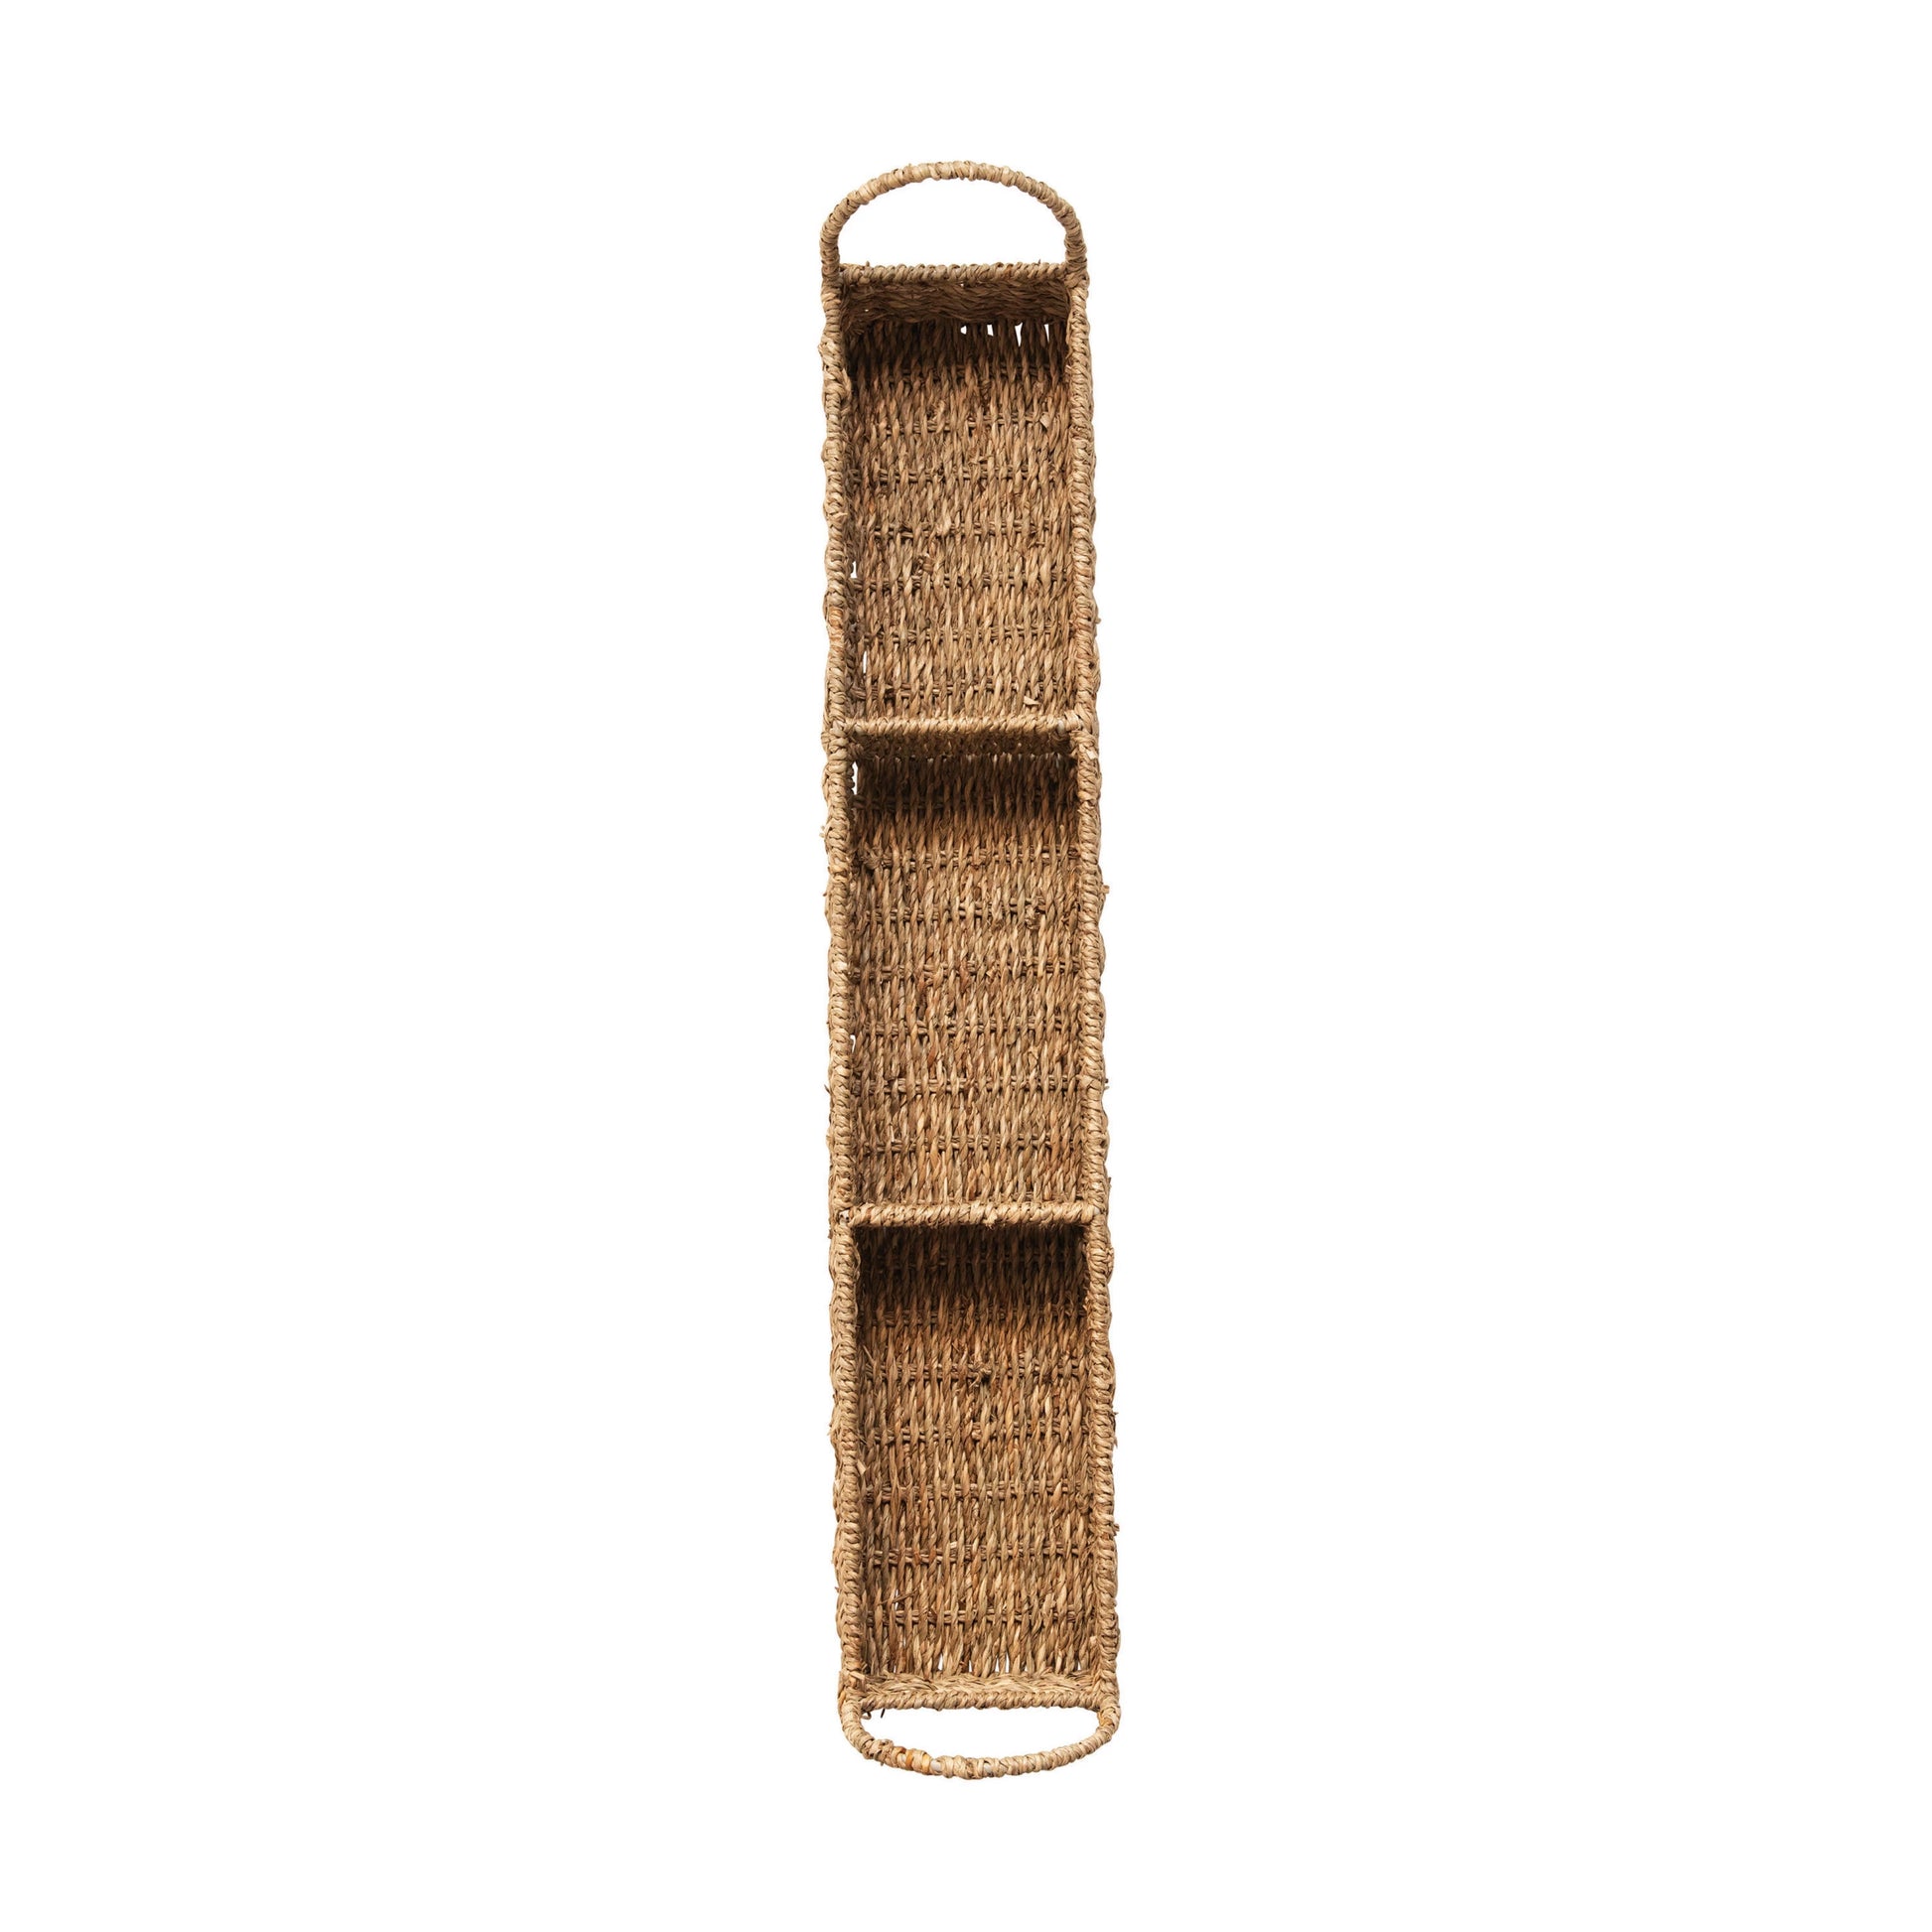 Seagrass Divider Tray - 25-1/4-in - Mellow Monkey